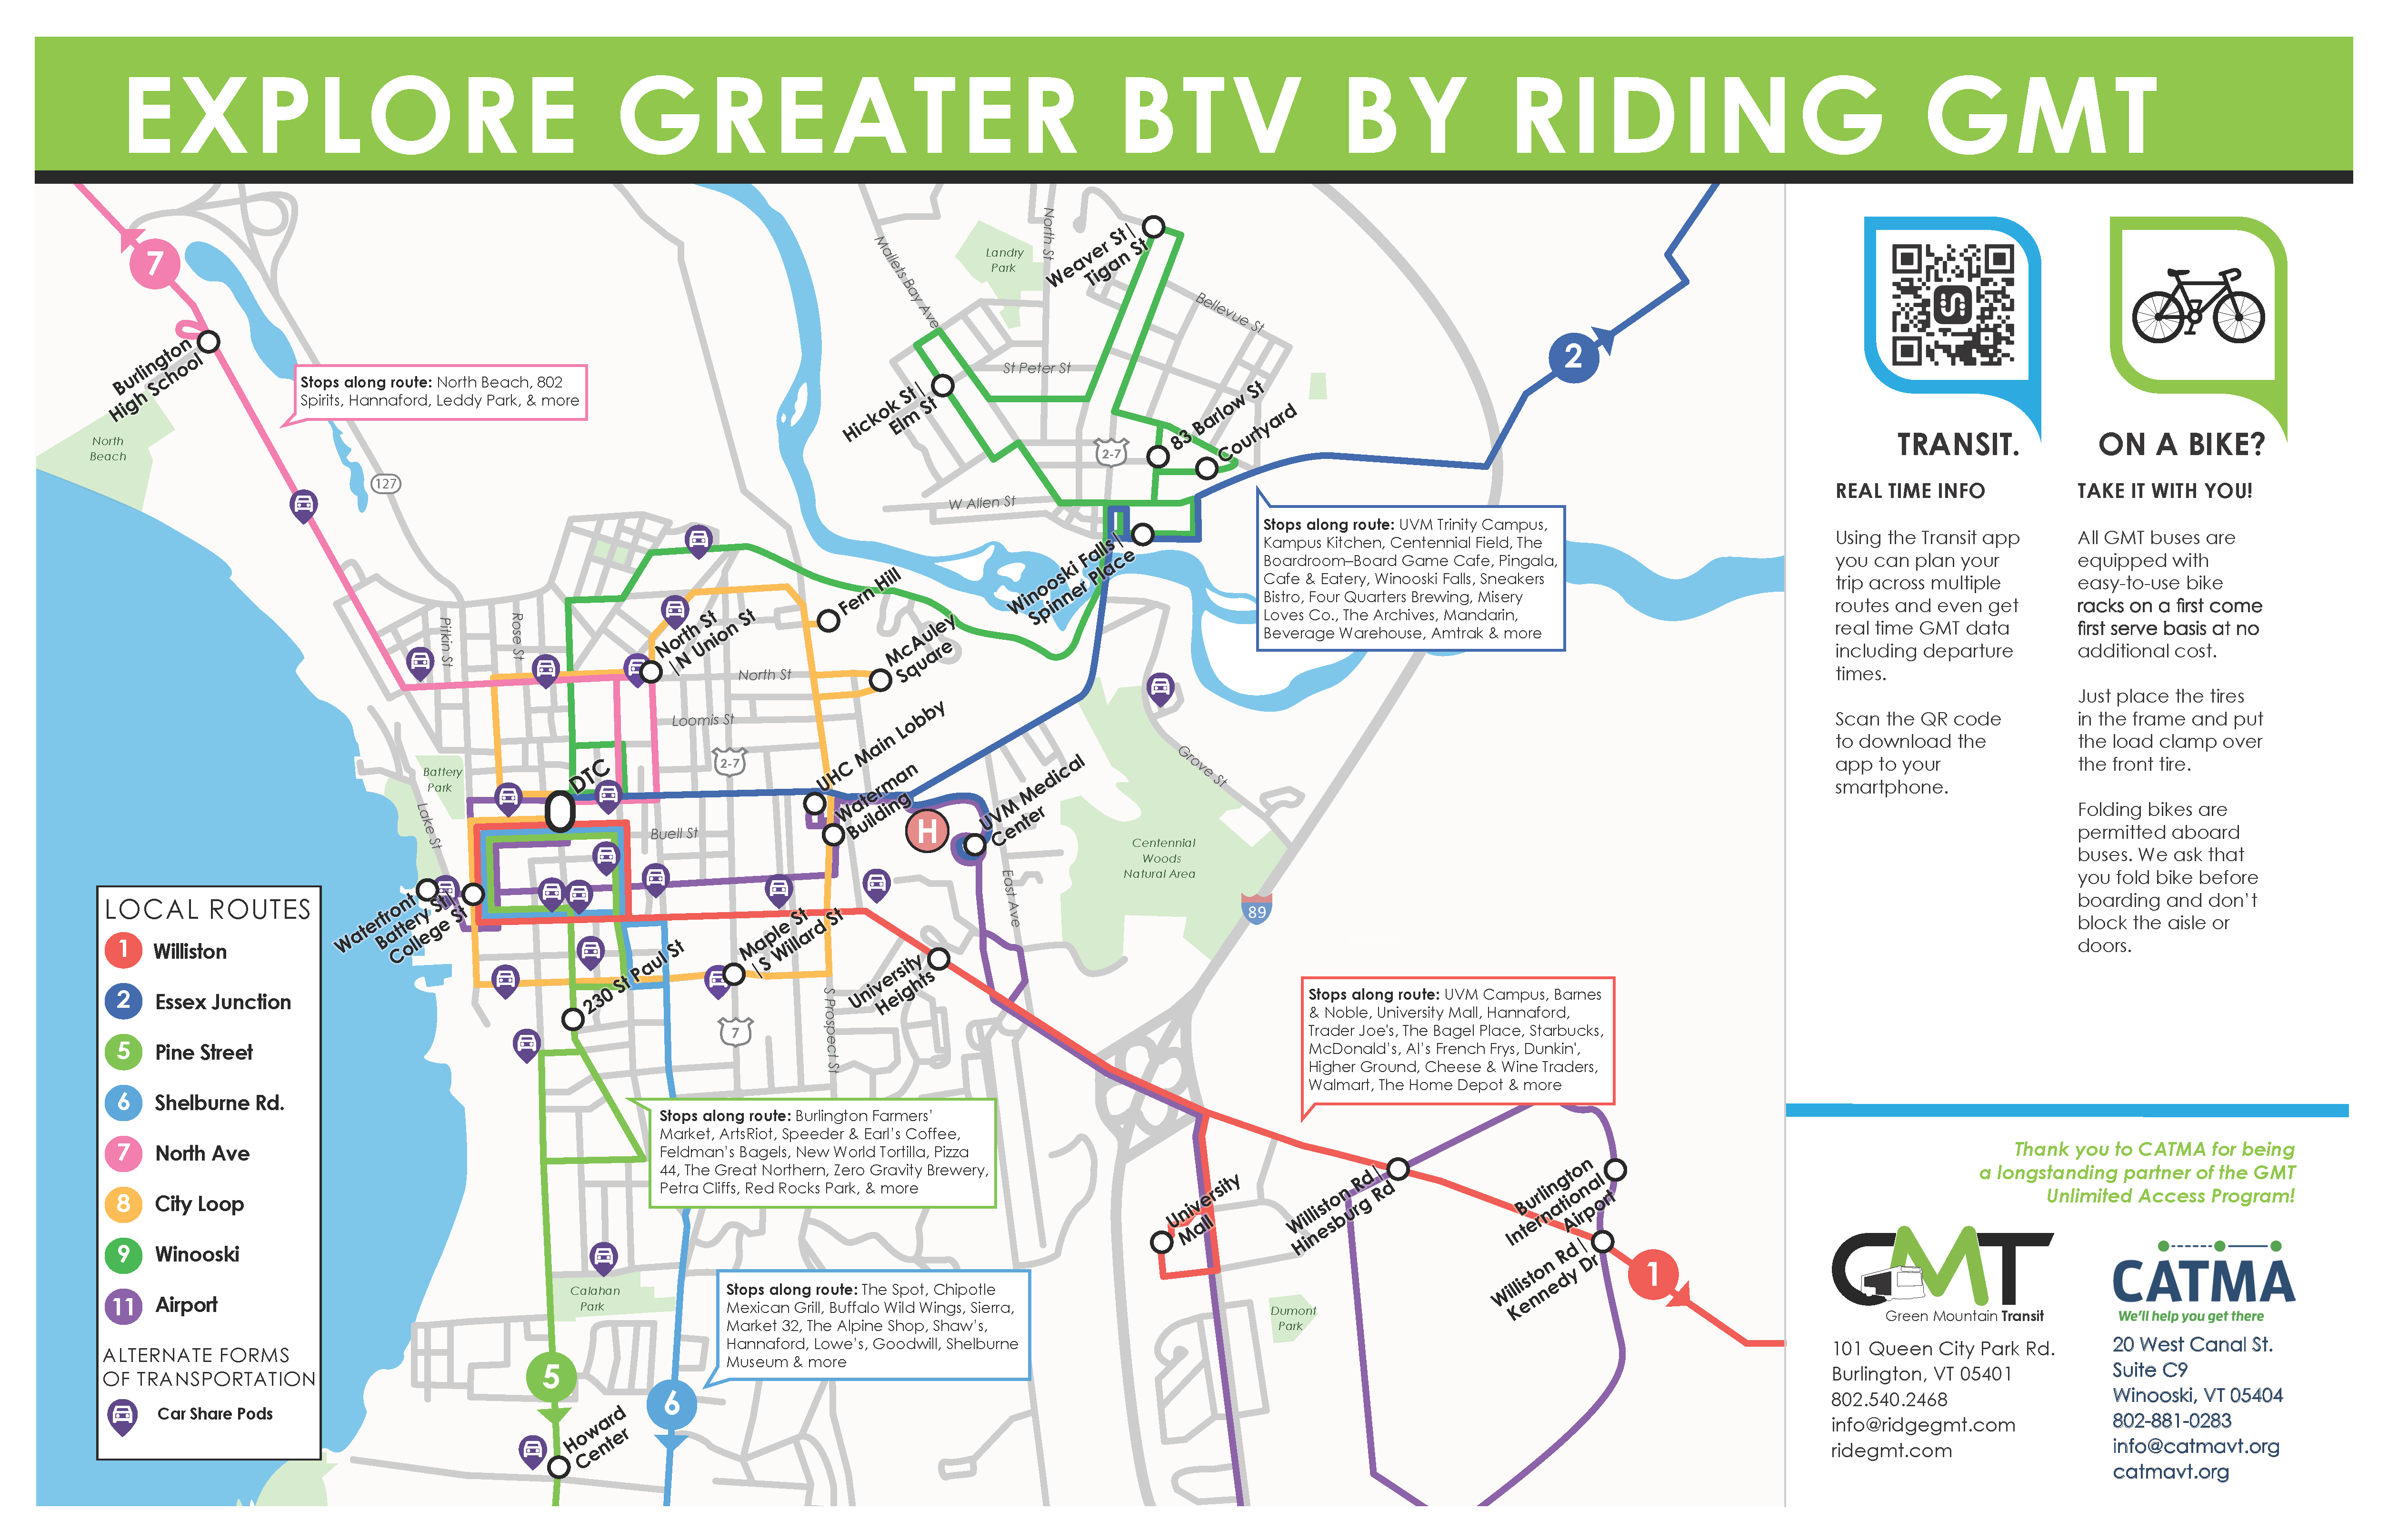 Graphic map titled "Explore Greater BTV by Riding GMT". The map includes eight different local bus routes, each in a different color. 